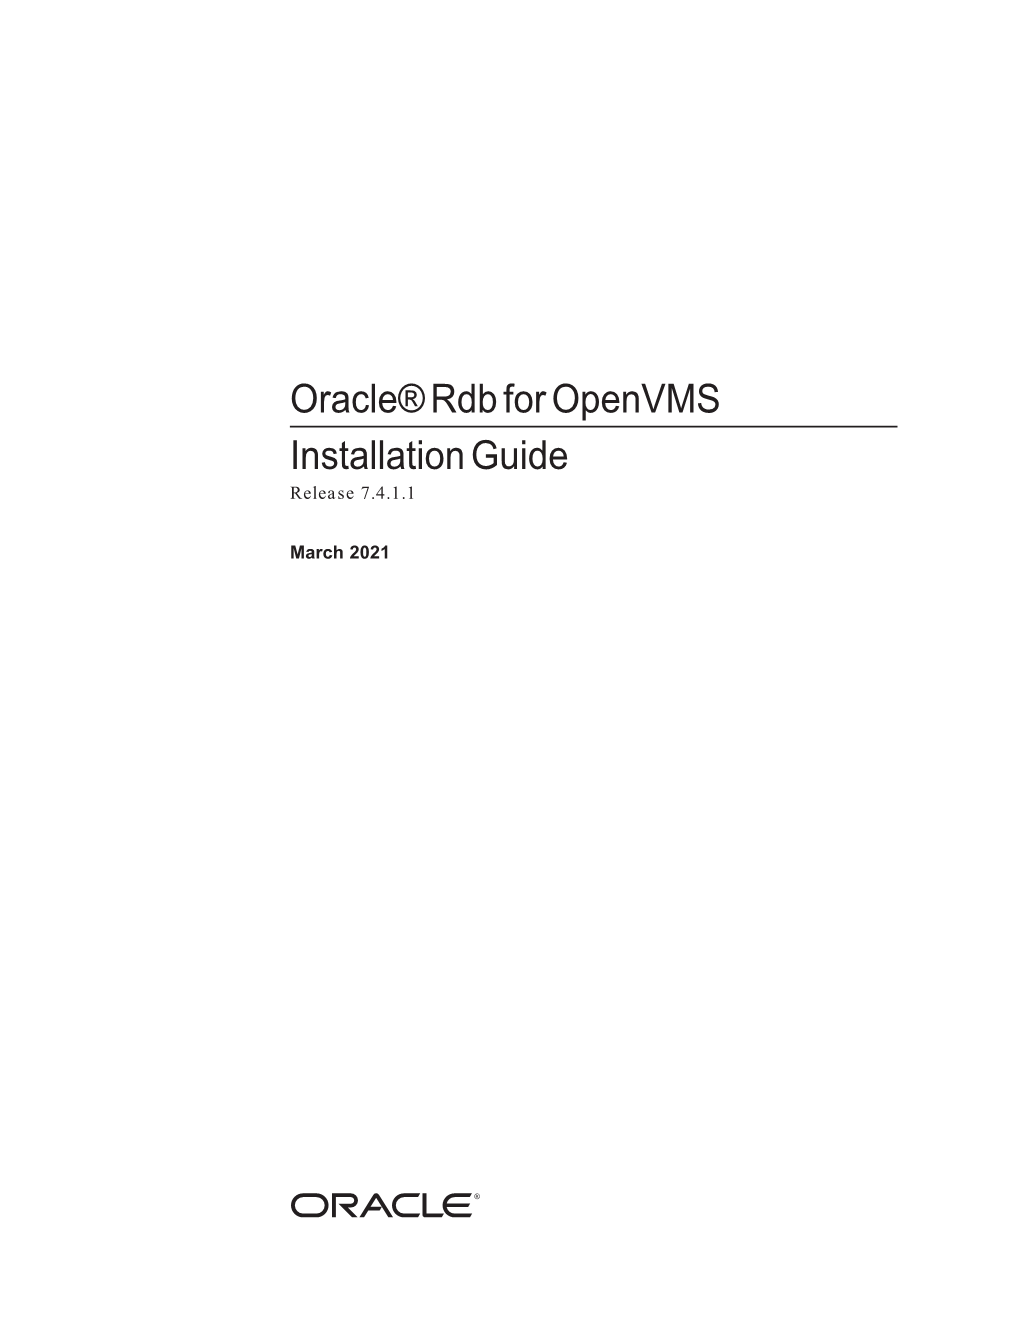 Oracle® Rdb for Openvms Installation Guide Release 7.4.1.1